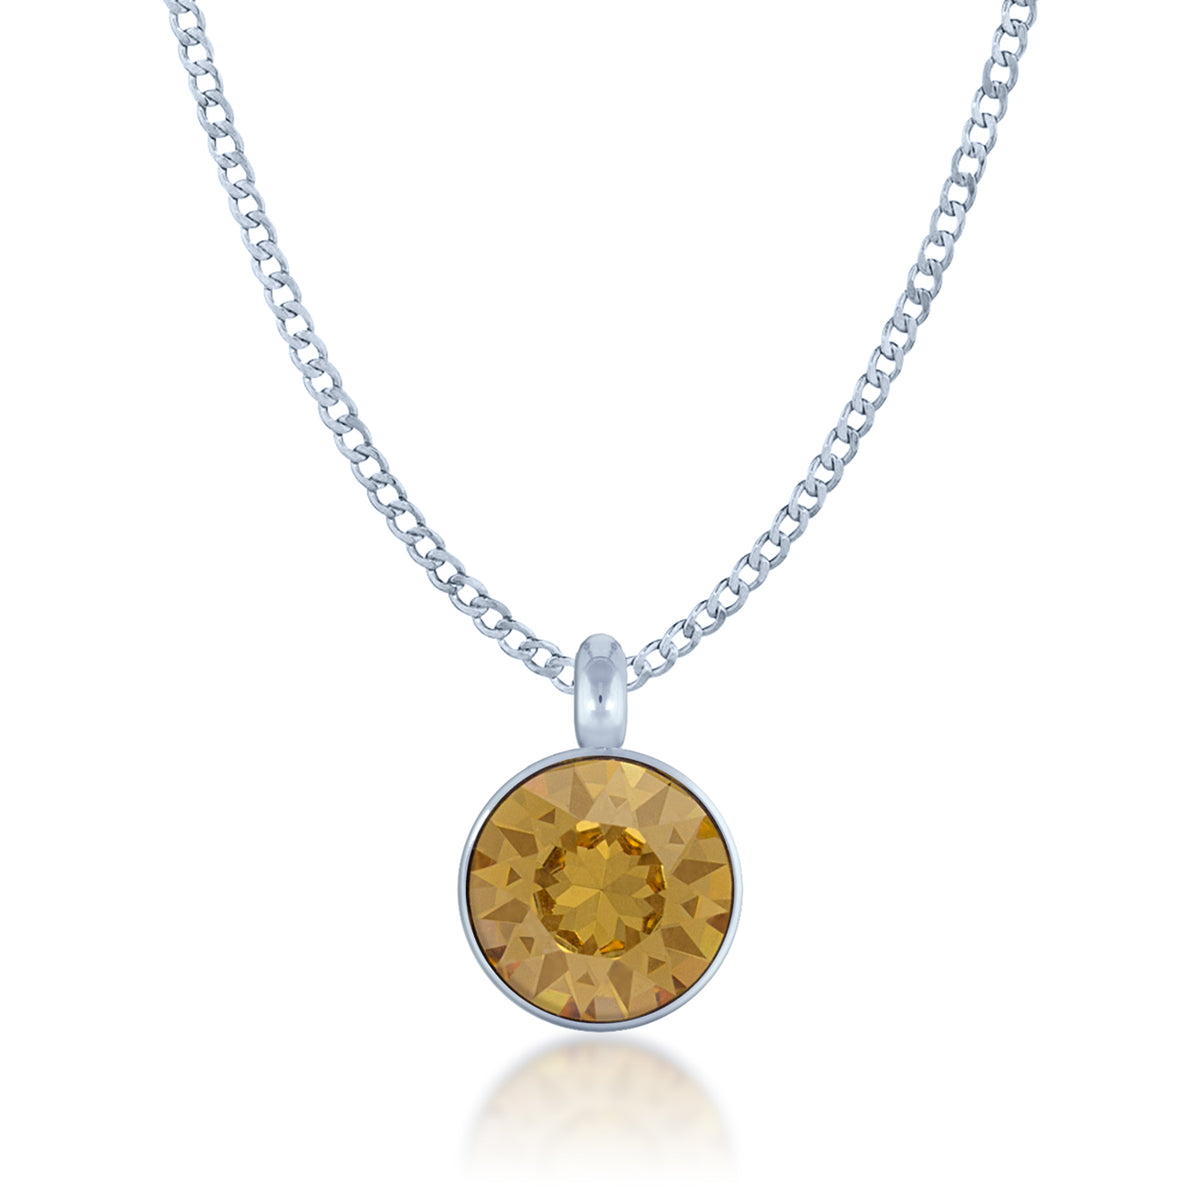 Bella Pendant Necklace with Yellow Brown Light Topaz Round Crystals from Swarovski Silver Toned Rhodium Plated - Ed Heart